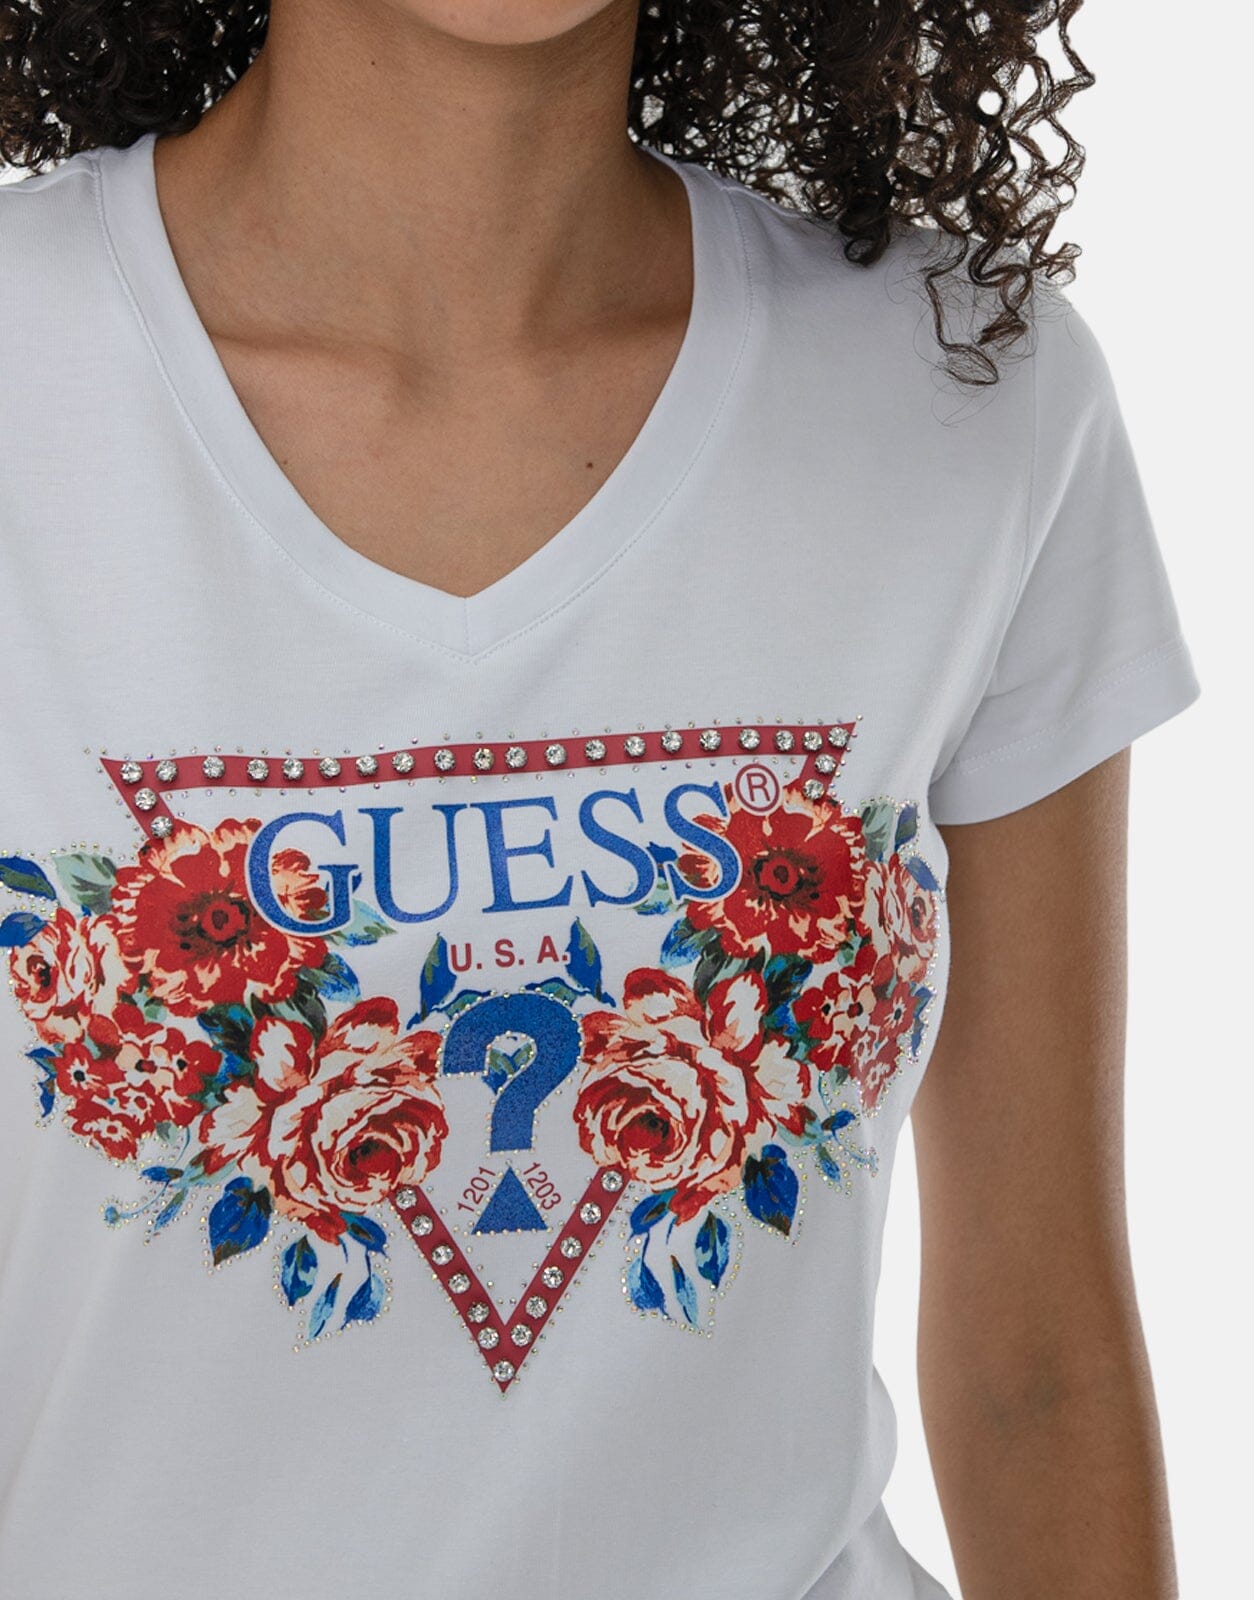 Guess Roses Triangle T-Shirt - Subwear